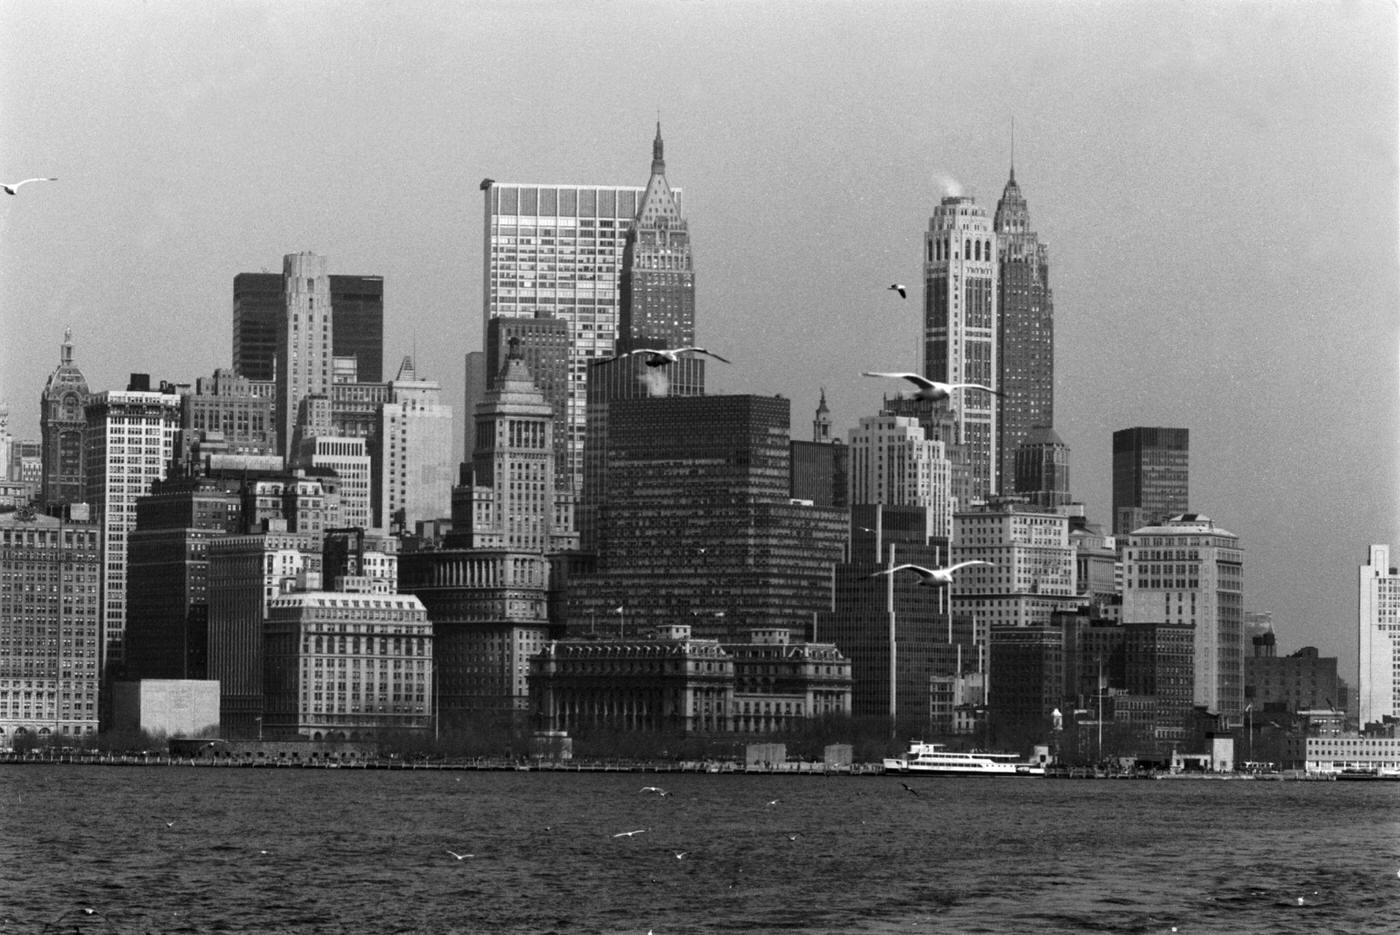 Southern Tip Of Manhattan Viewed From The Staten Island Ferry, Around 1950.